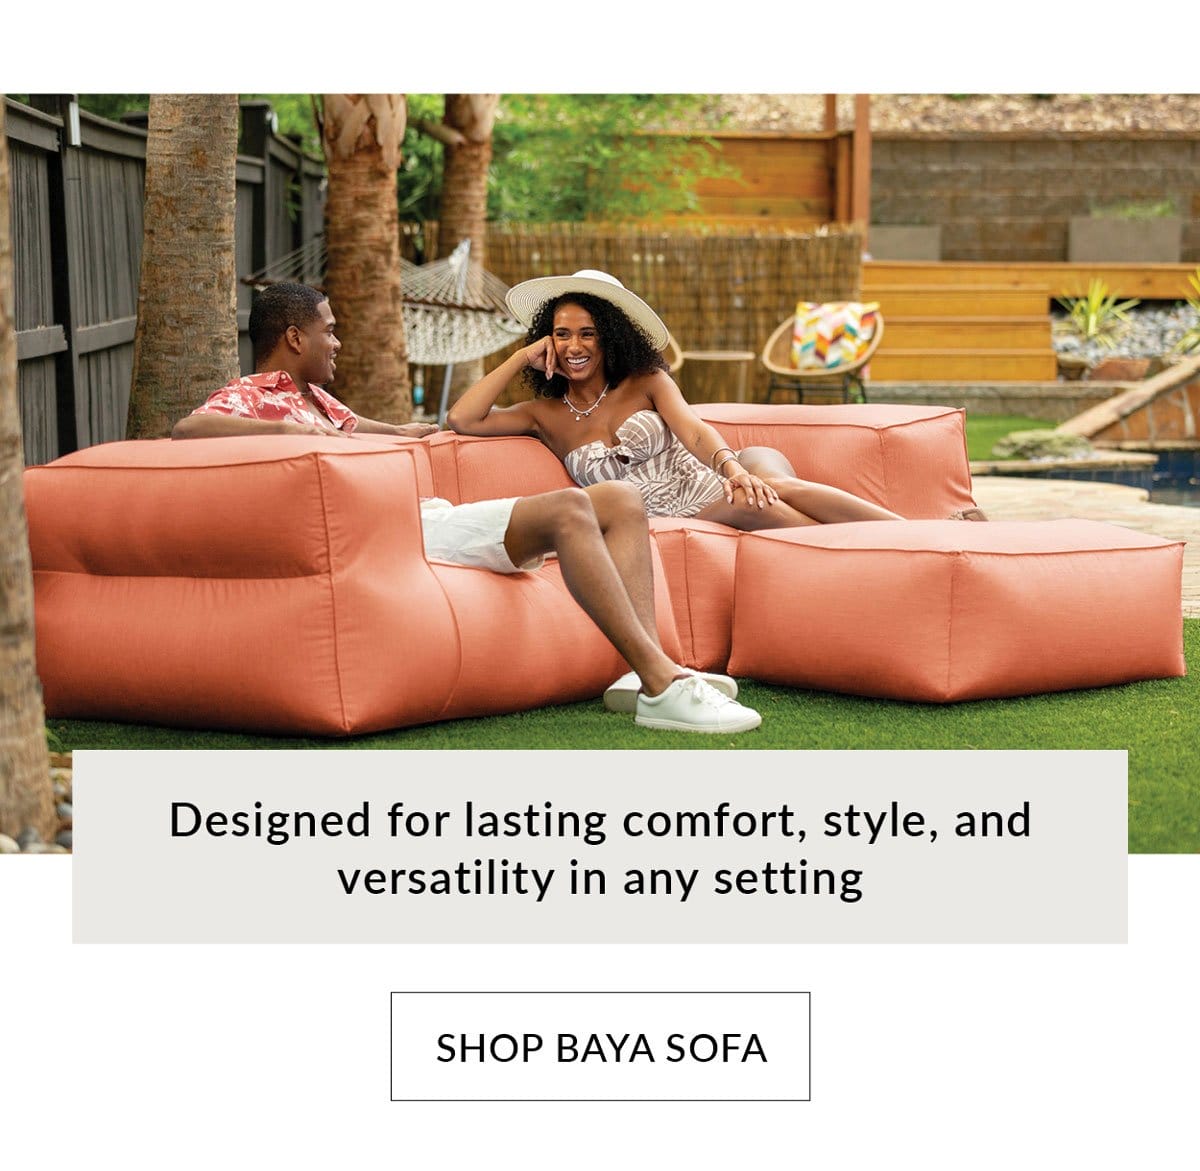 Designed for lasting comfort, style, and versatility in any setting